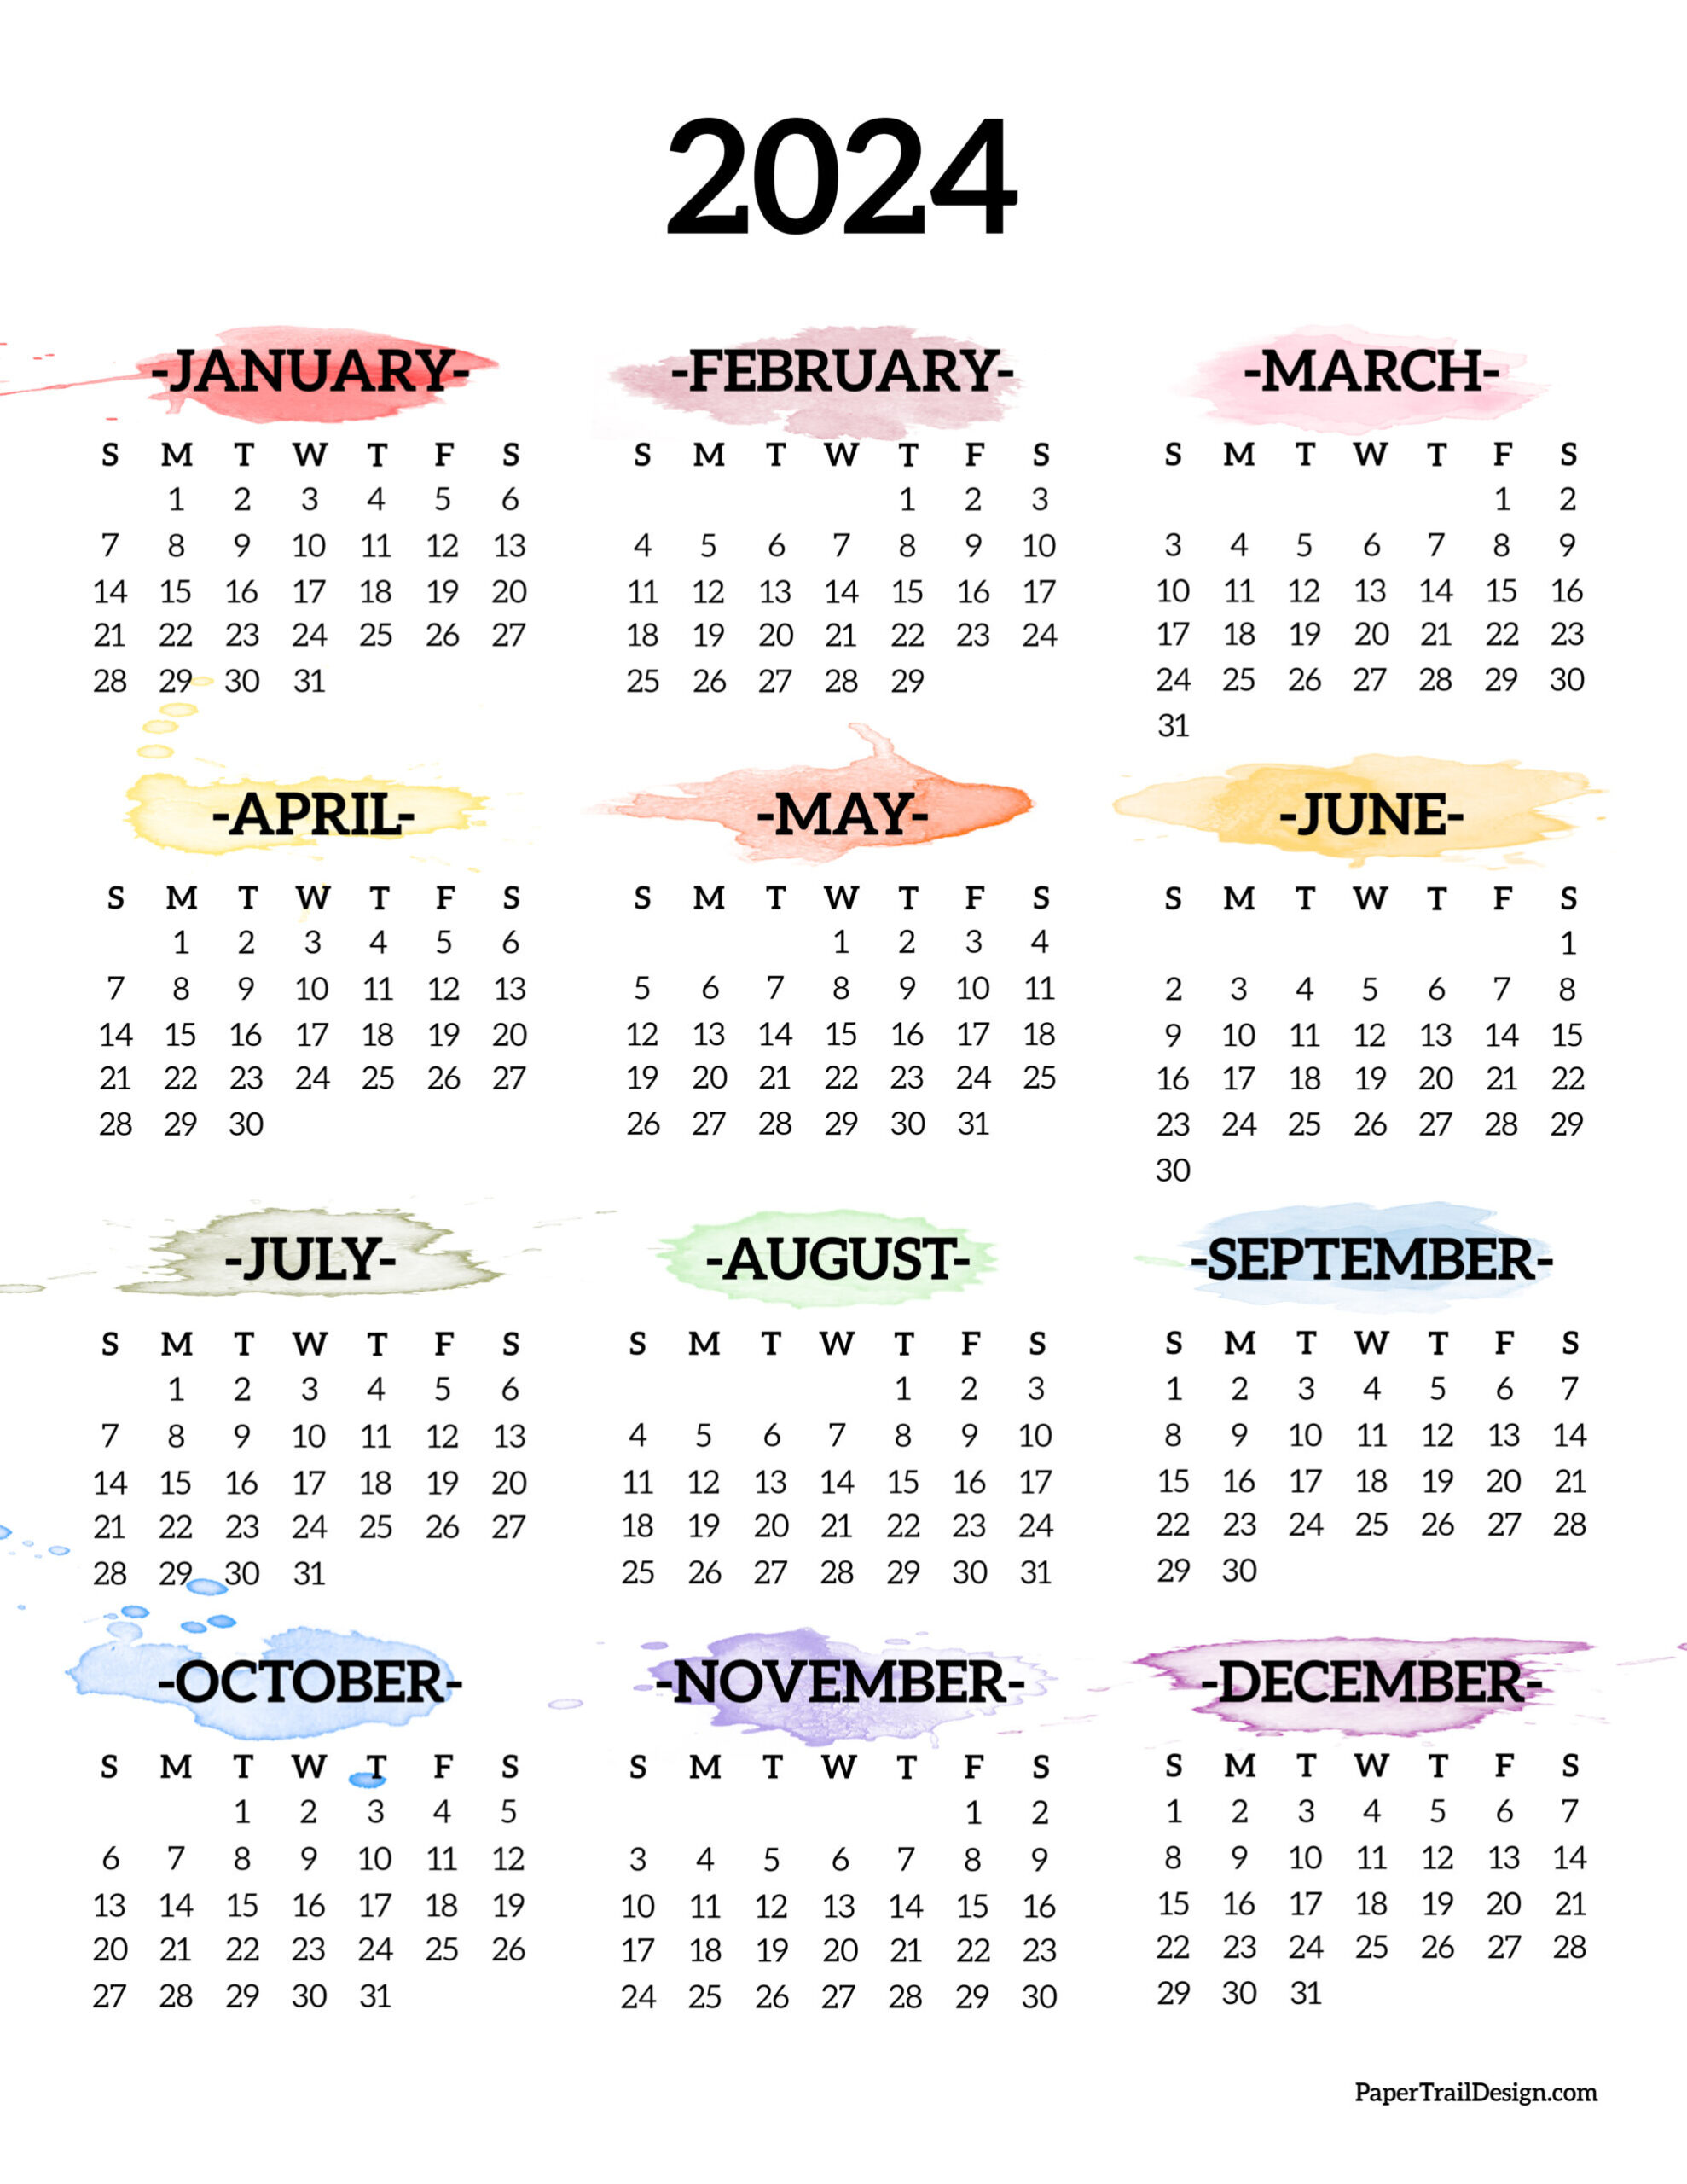 Calendar 2024 Printable One Page - Paper Trail Design | Printable Calendar 2024 One Page